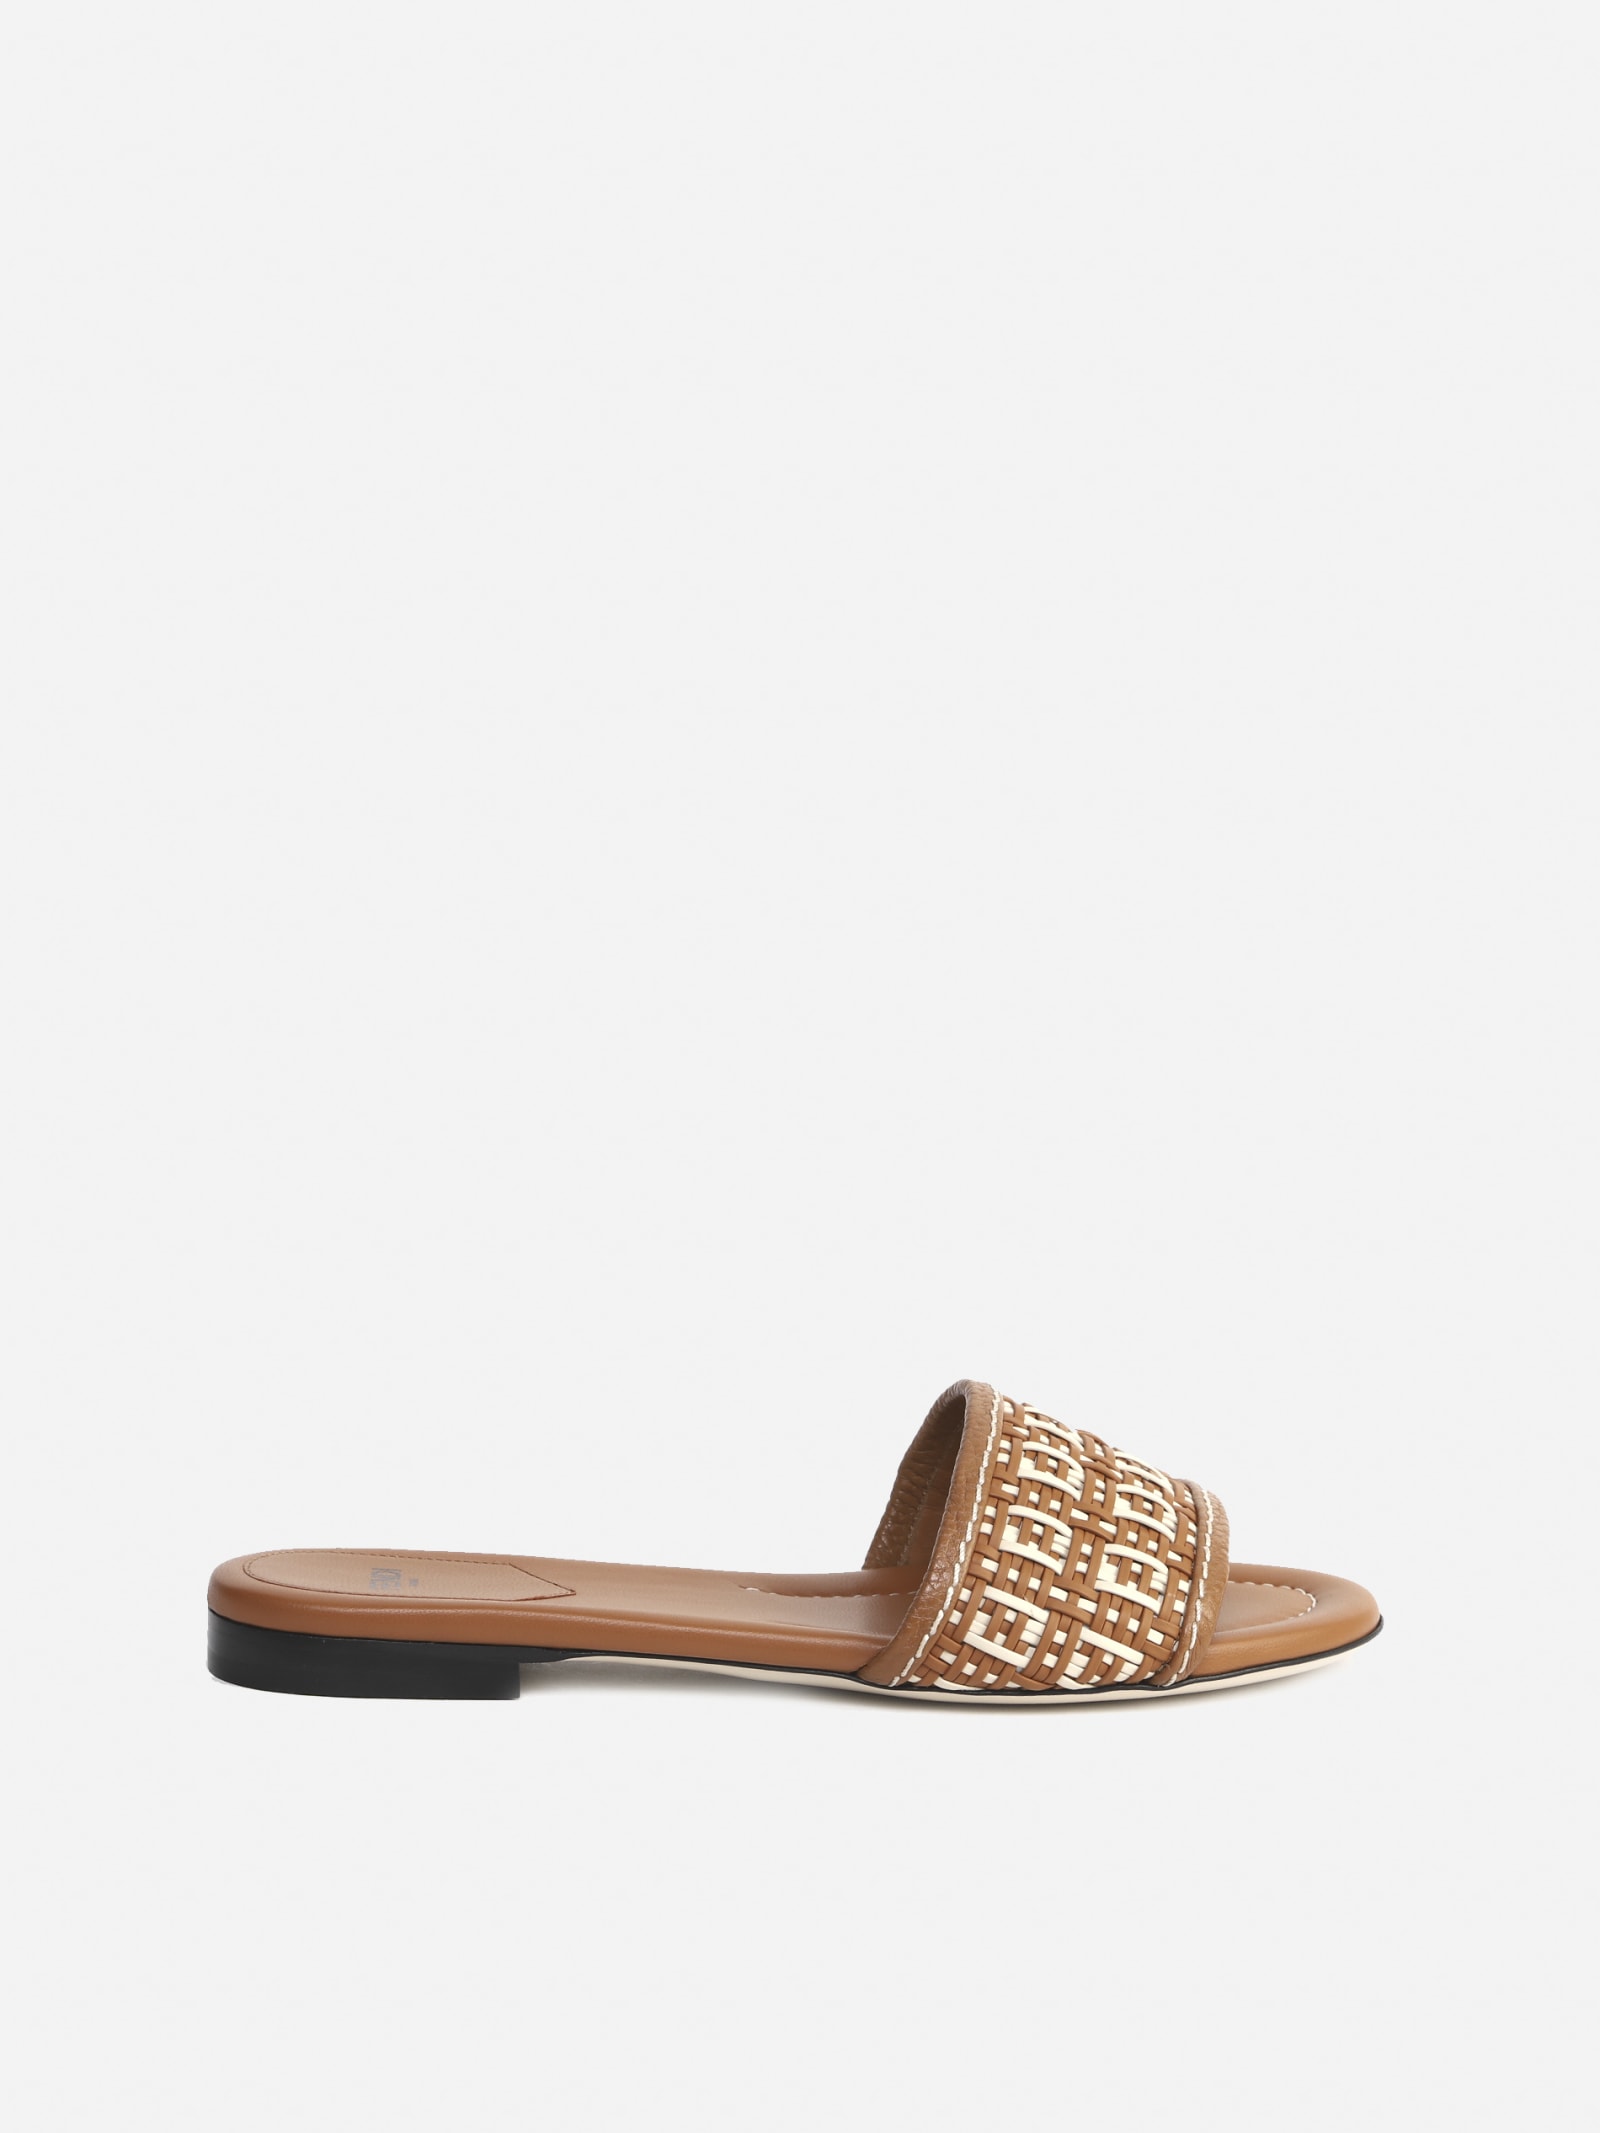 FENDI SLIDES SANDALS IN WOVEN LEATHER WITH FF MOTIF,8R8092 AEH6F1D1W